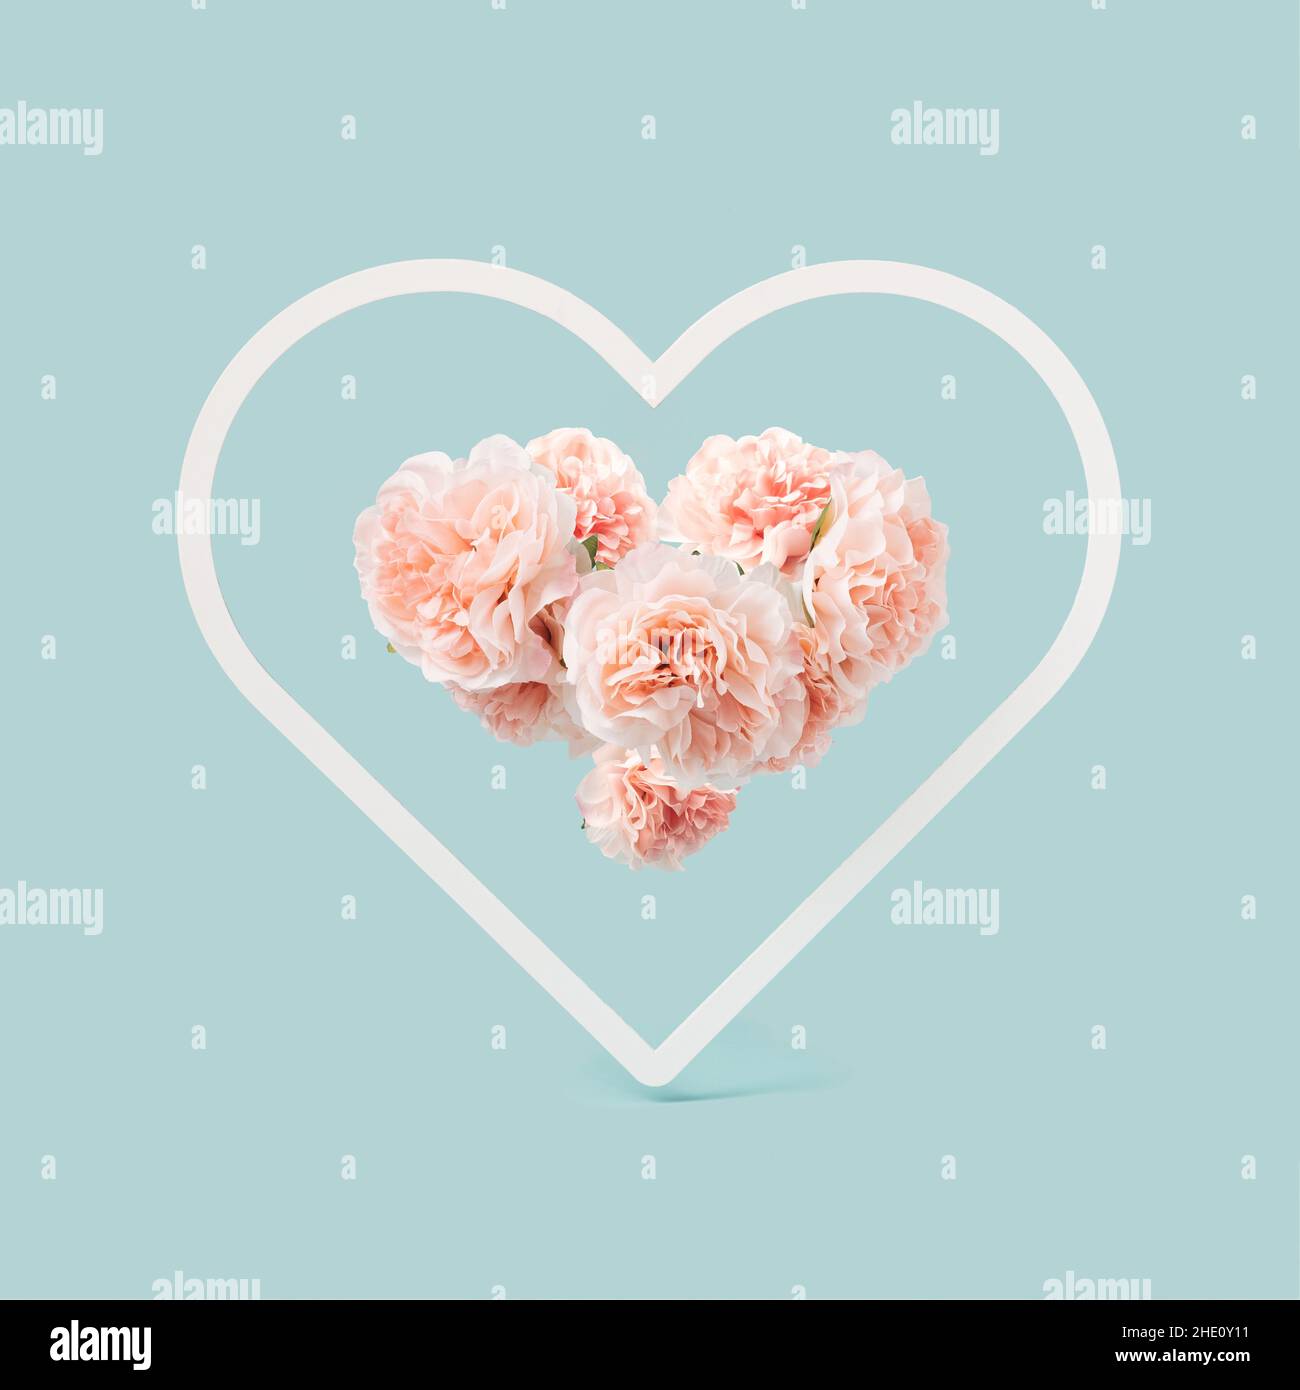 Peonia pink flowers arrangement in a heart shaped frame. Minimal light blue Valentine's background Stock Photo